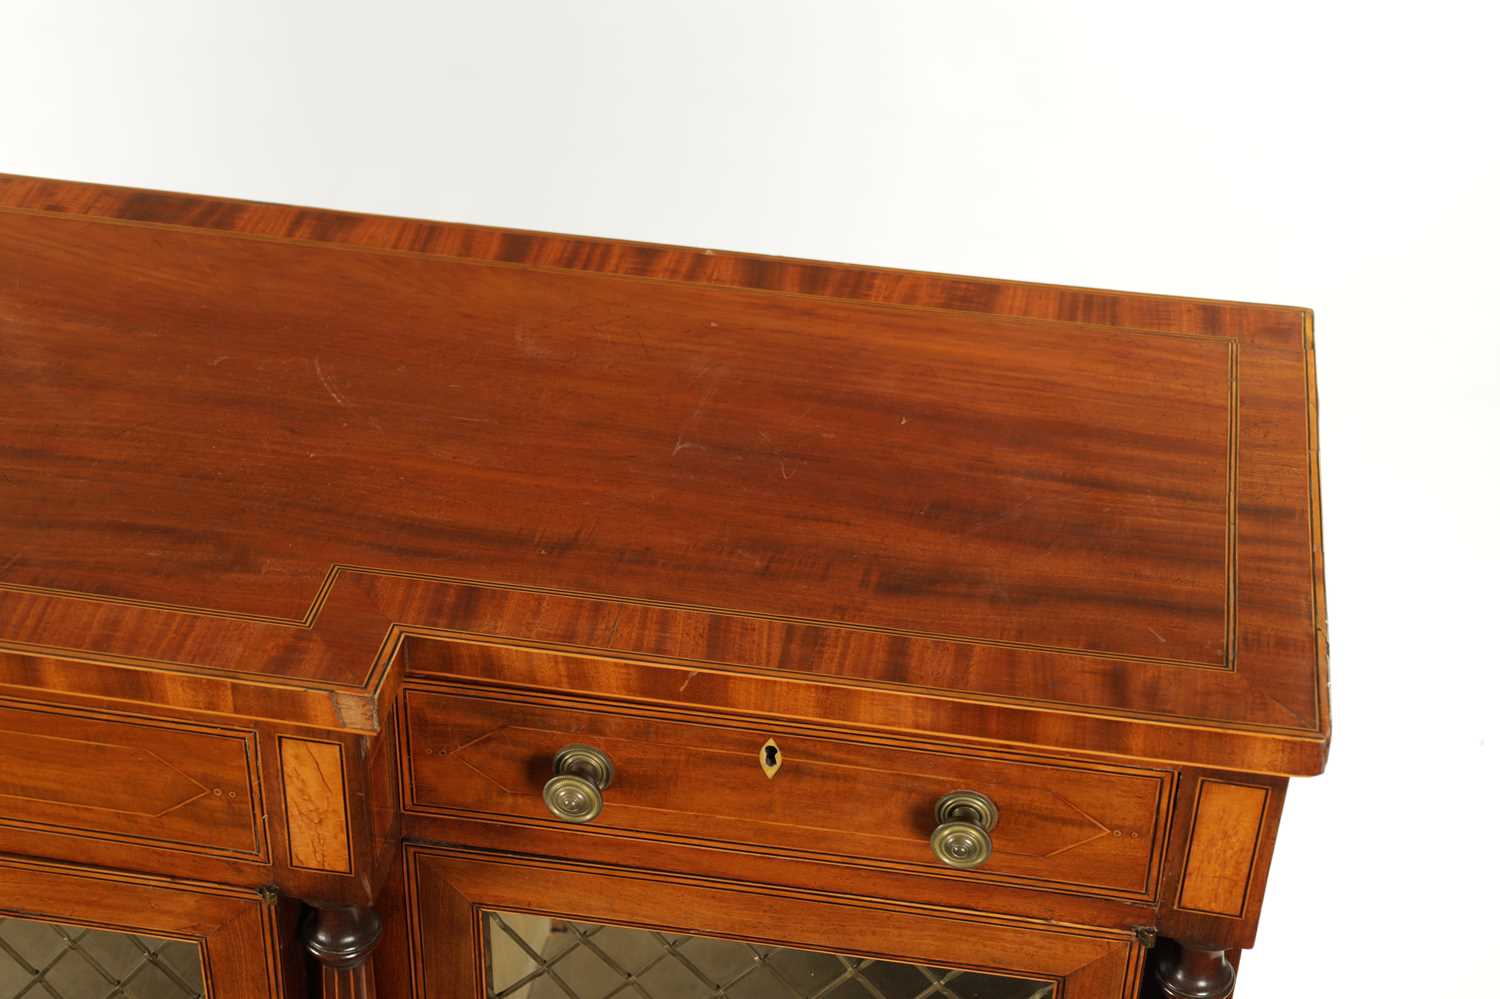 A FINE GEORGE III SATINWOOD BANDED AND INLAID FIGURED MAHOGANY BREAKFRONT SIDE CABINET - Image 5 of 6